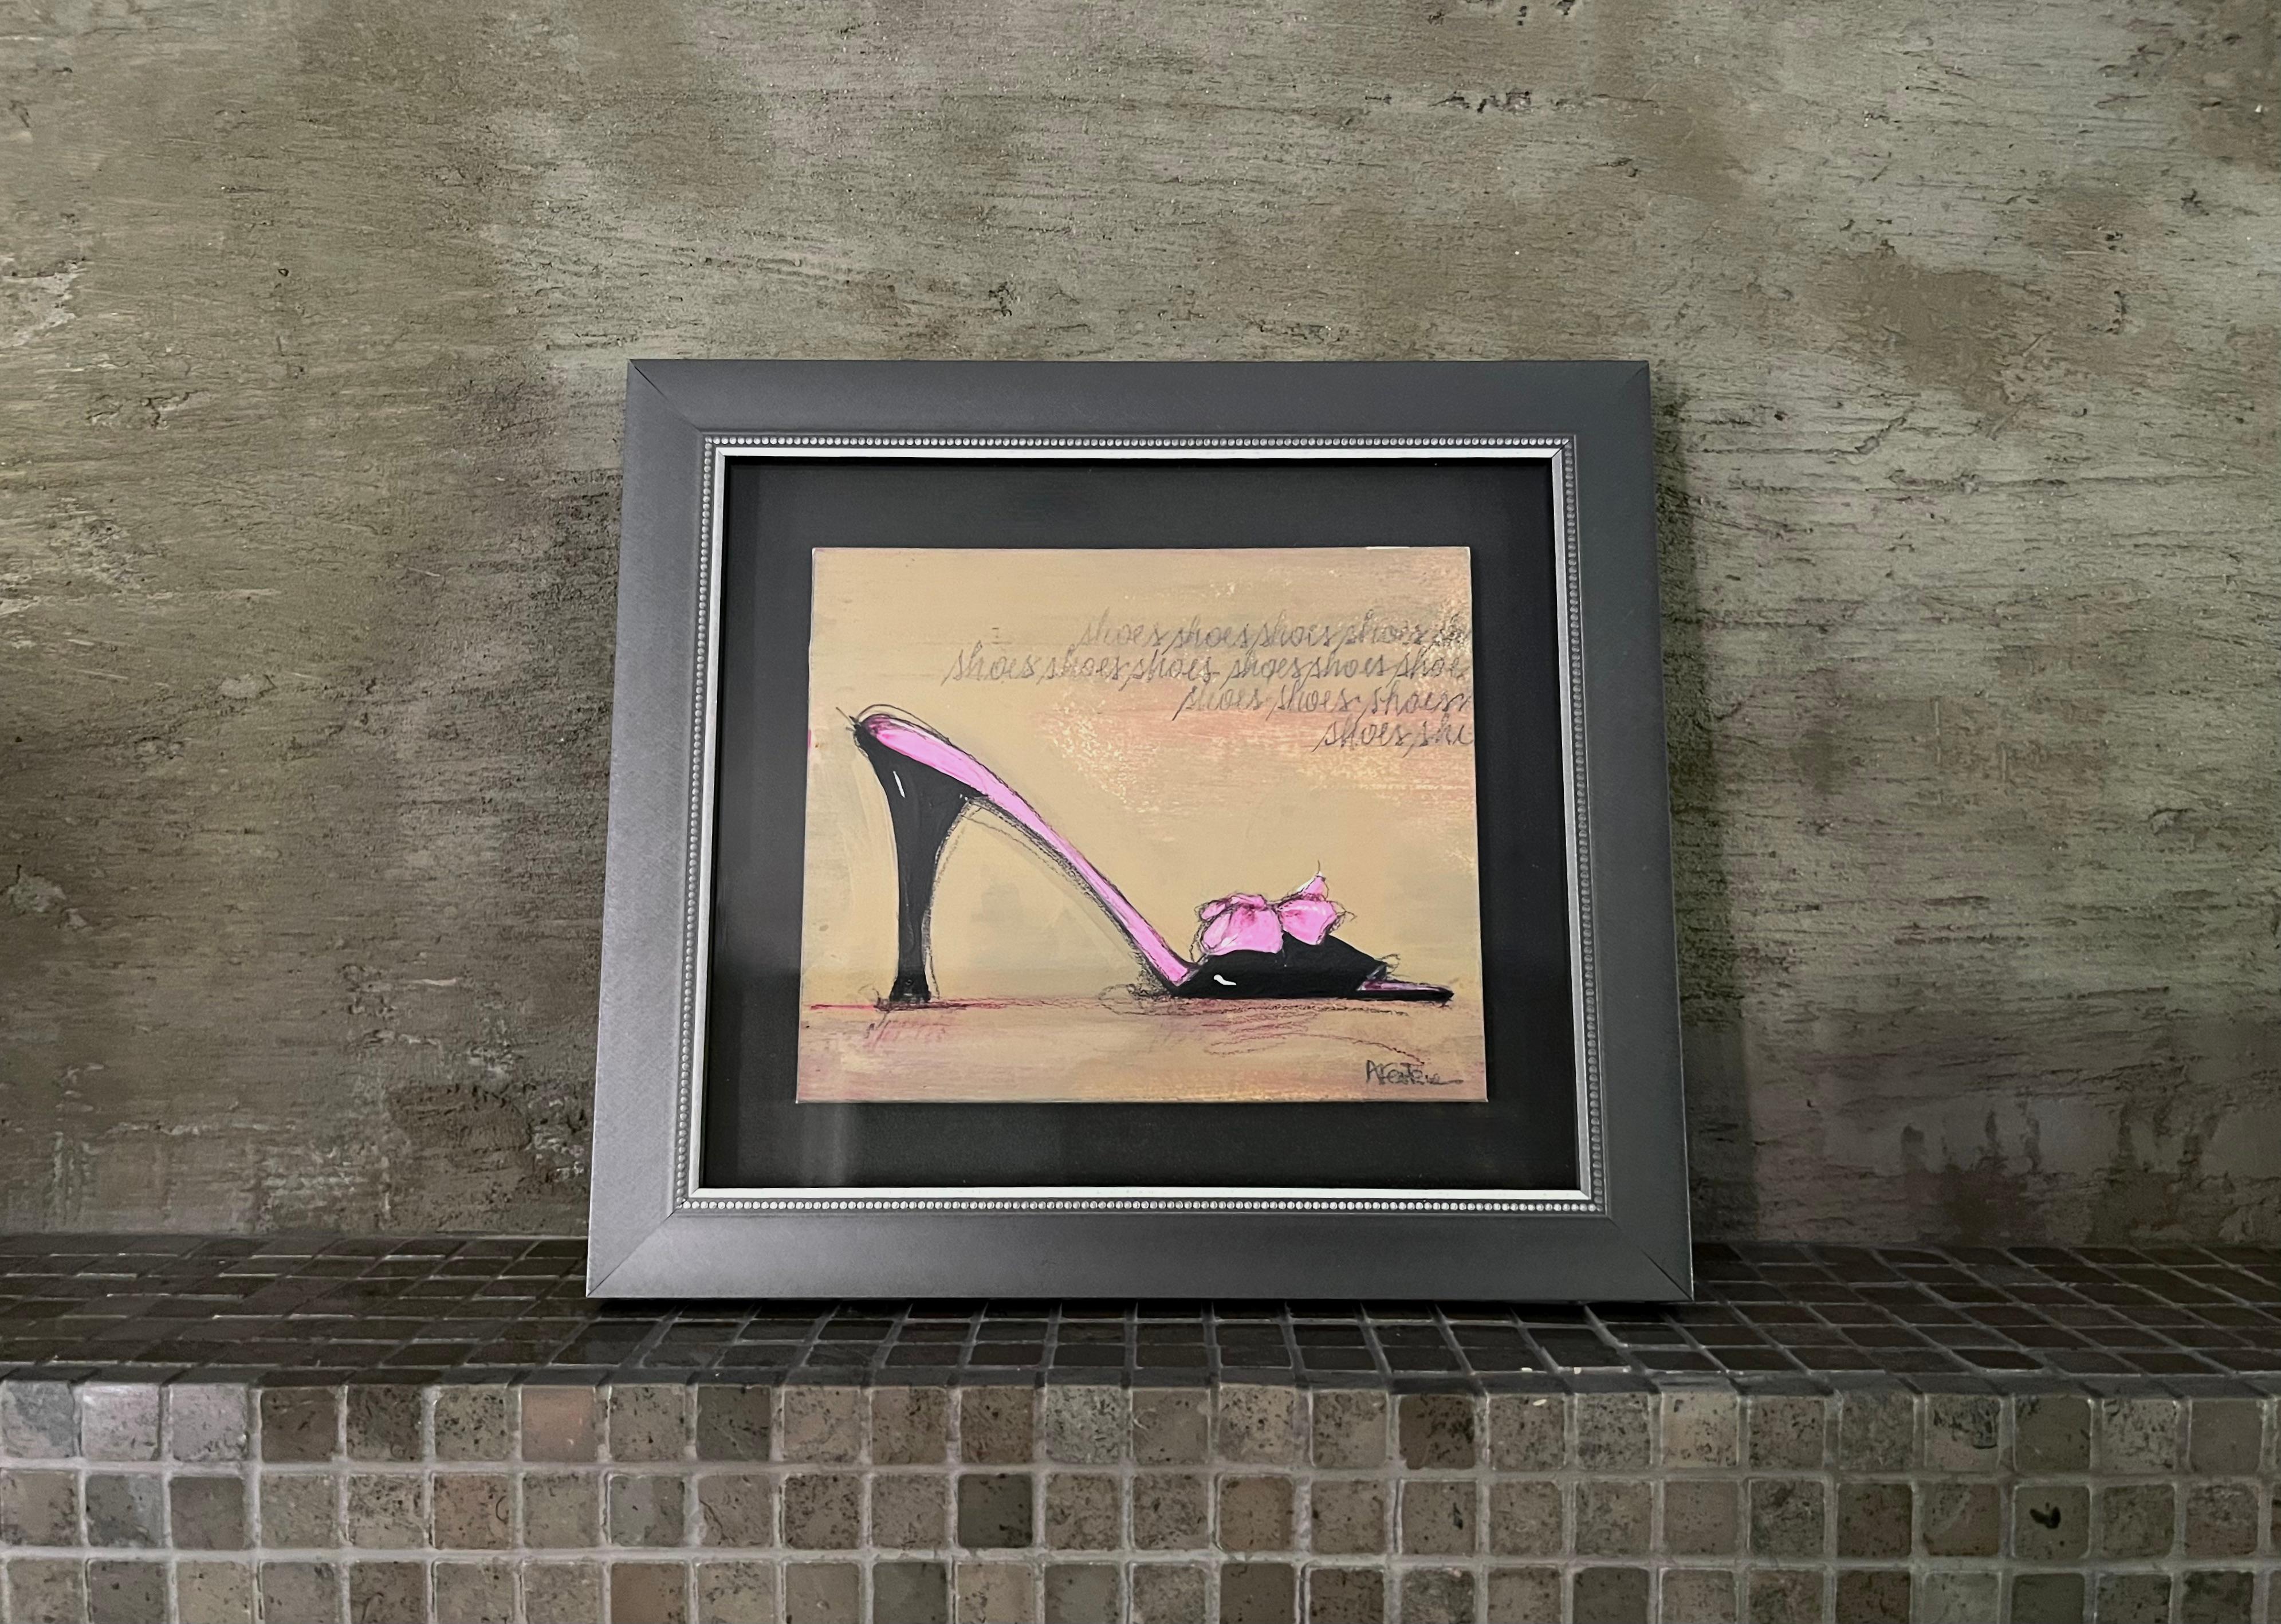 I Love Shoes - 6 (8.25”x9.25”, framed, part of series) - Contemporary Art by Andrea Stajan-Ferkul